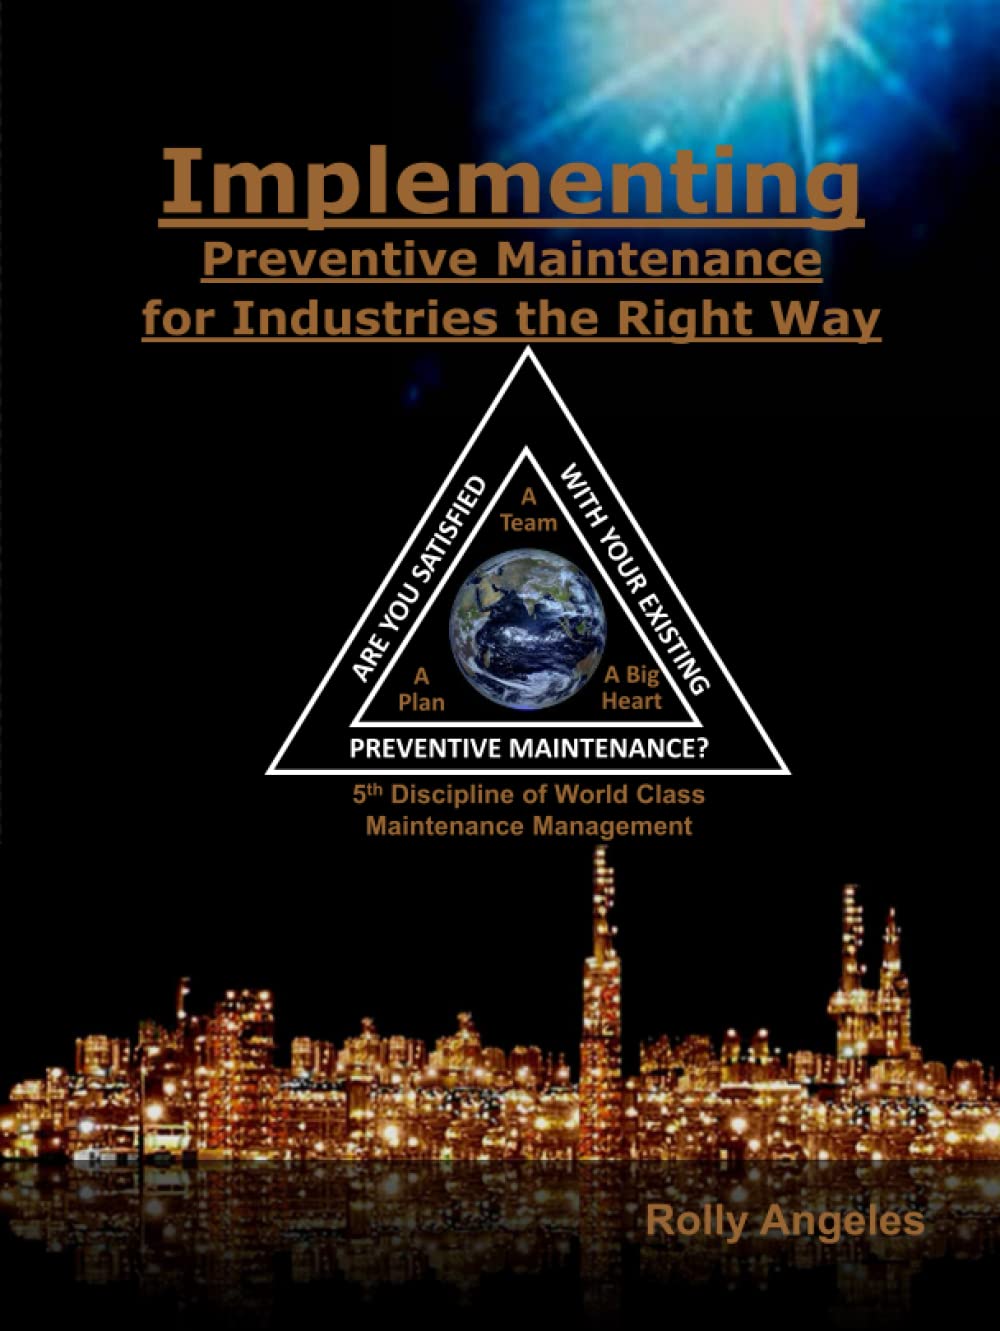 Implementing Preventive Maintenance for Industries The Right Way: 5th Discipline on World Class Maintenance Management